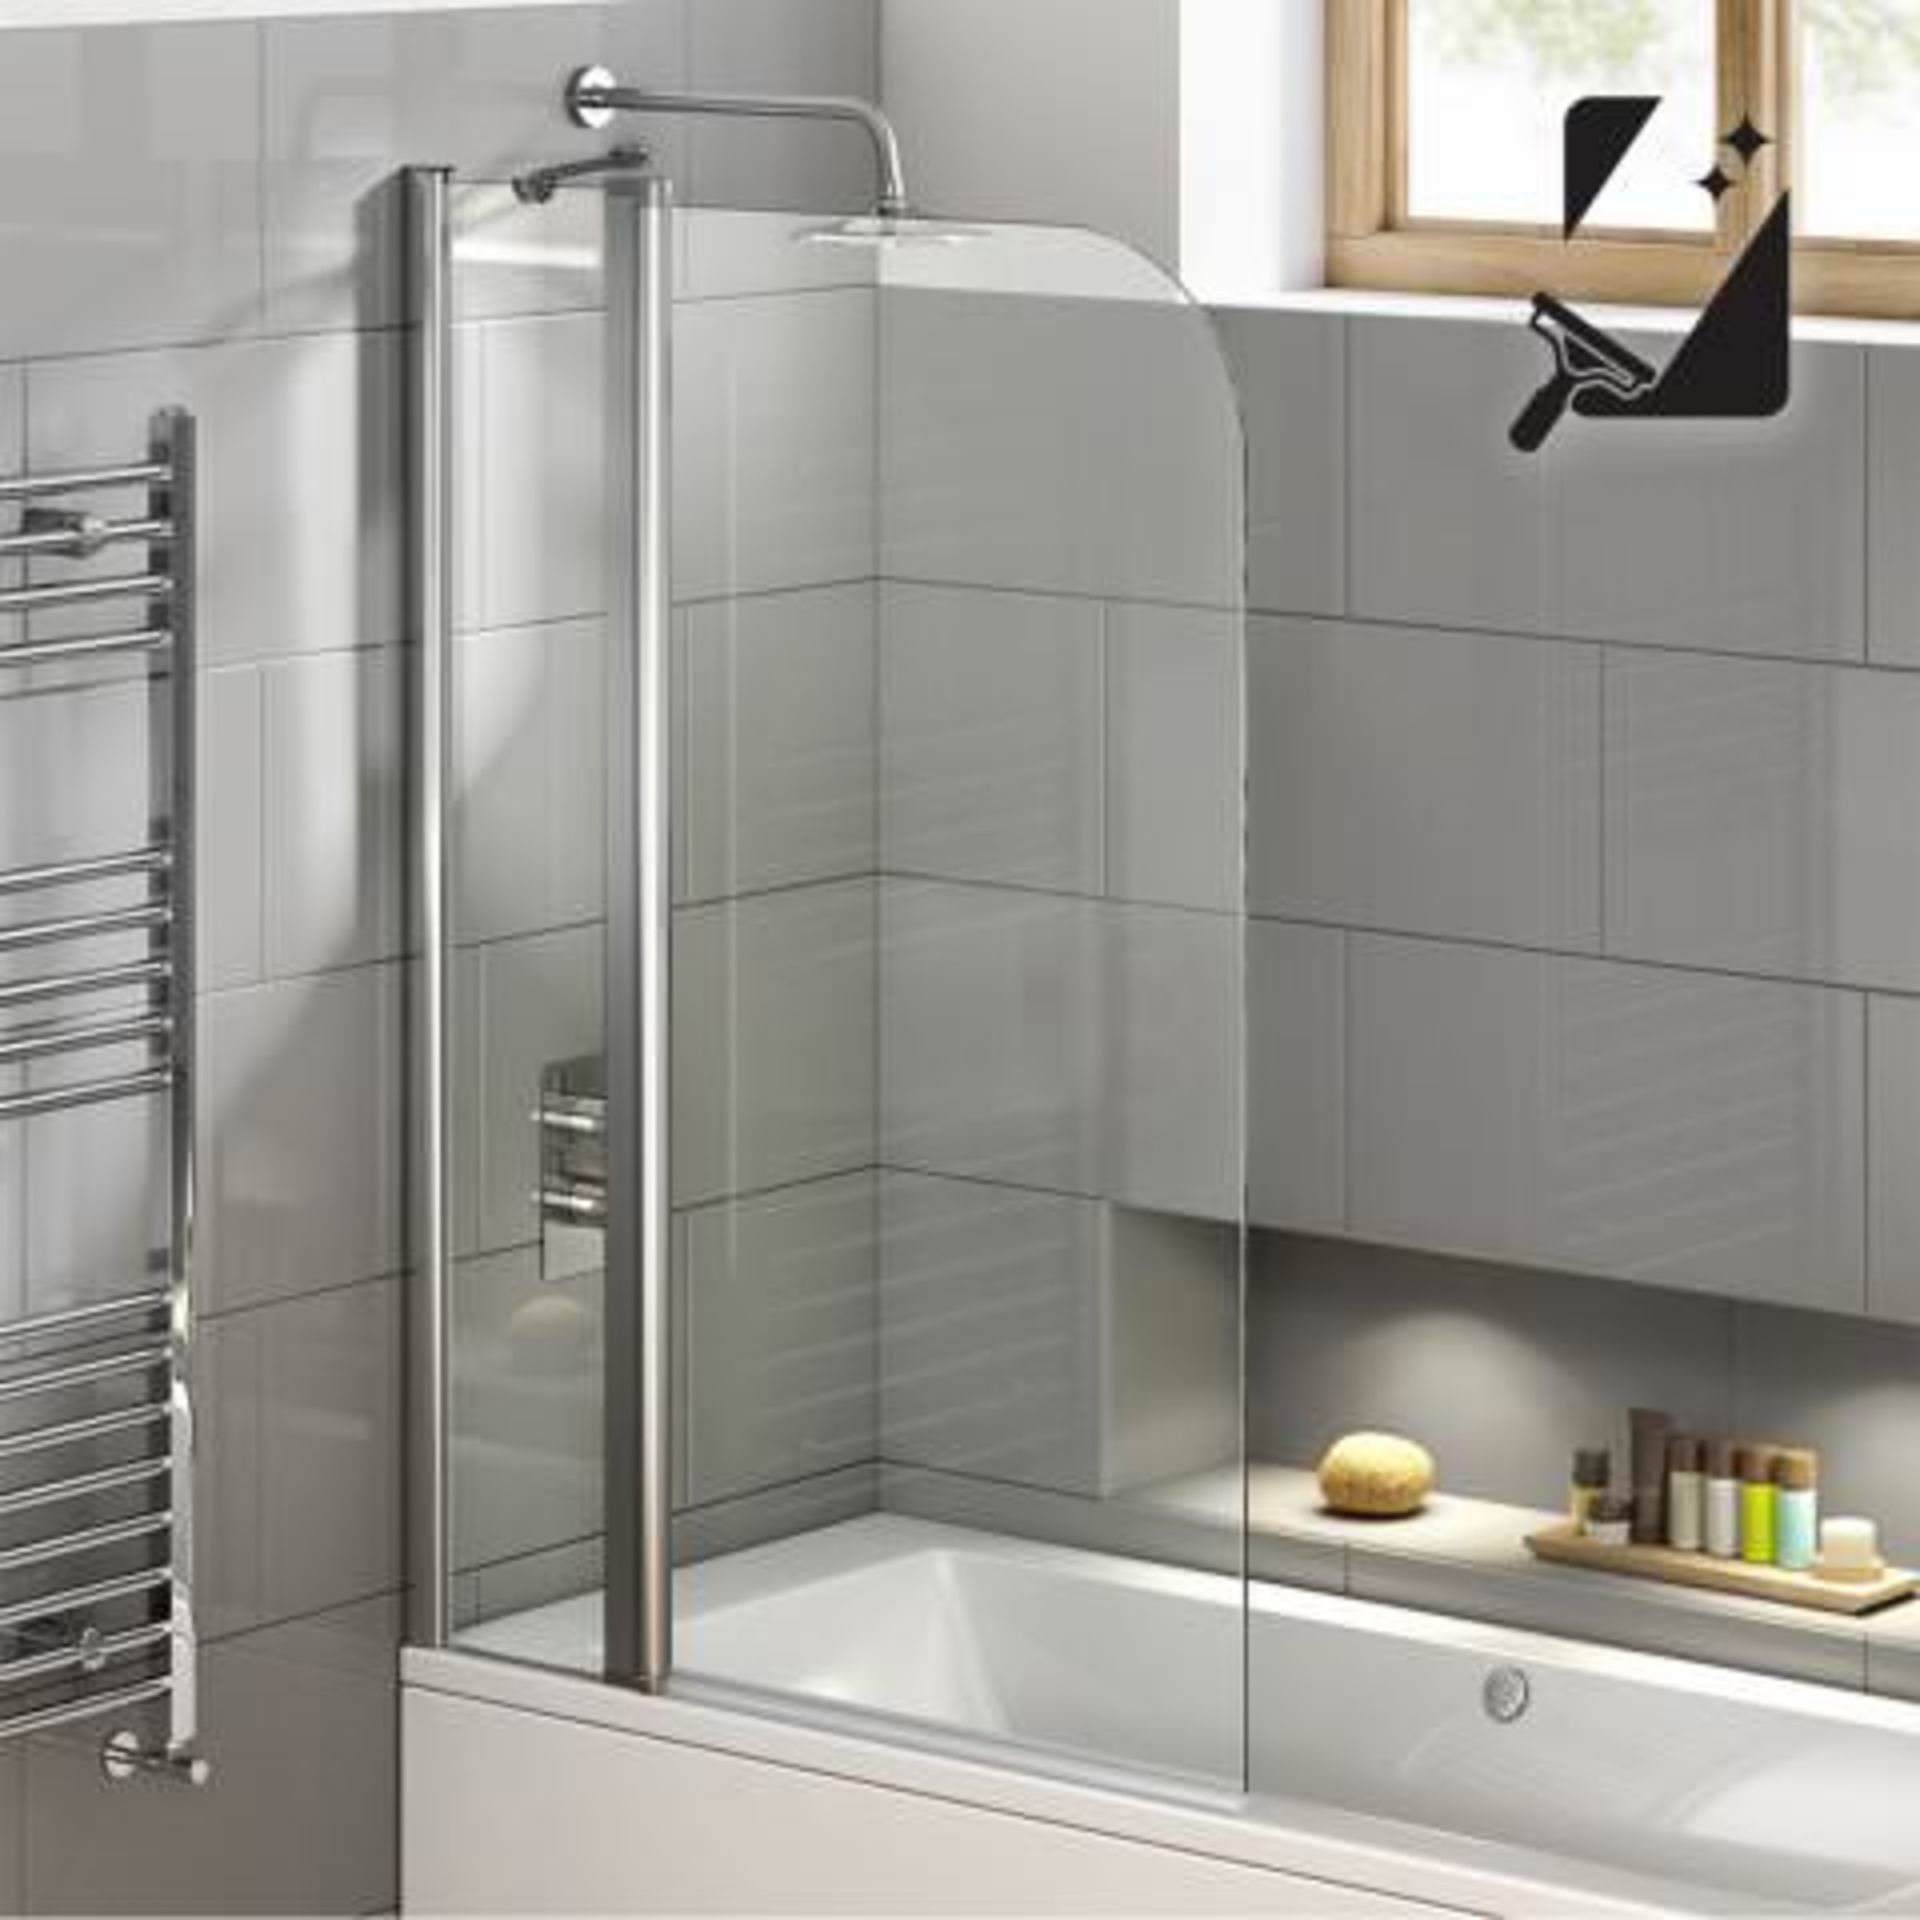 (Z66) 1000mm - 6mm - EasyClean Straight Bath Screen. RRP £224.99. The clue is in the name: Easy